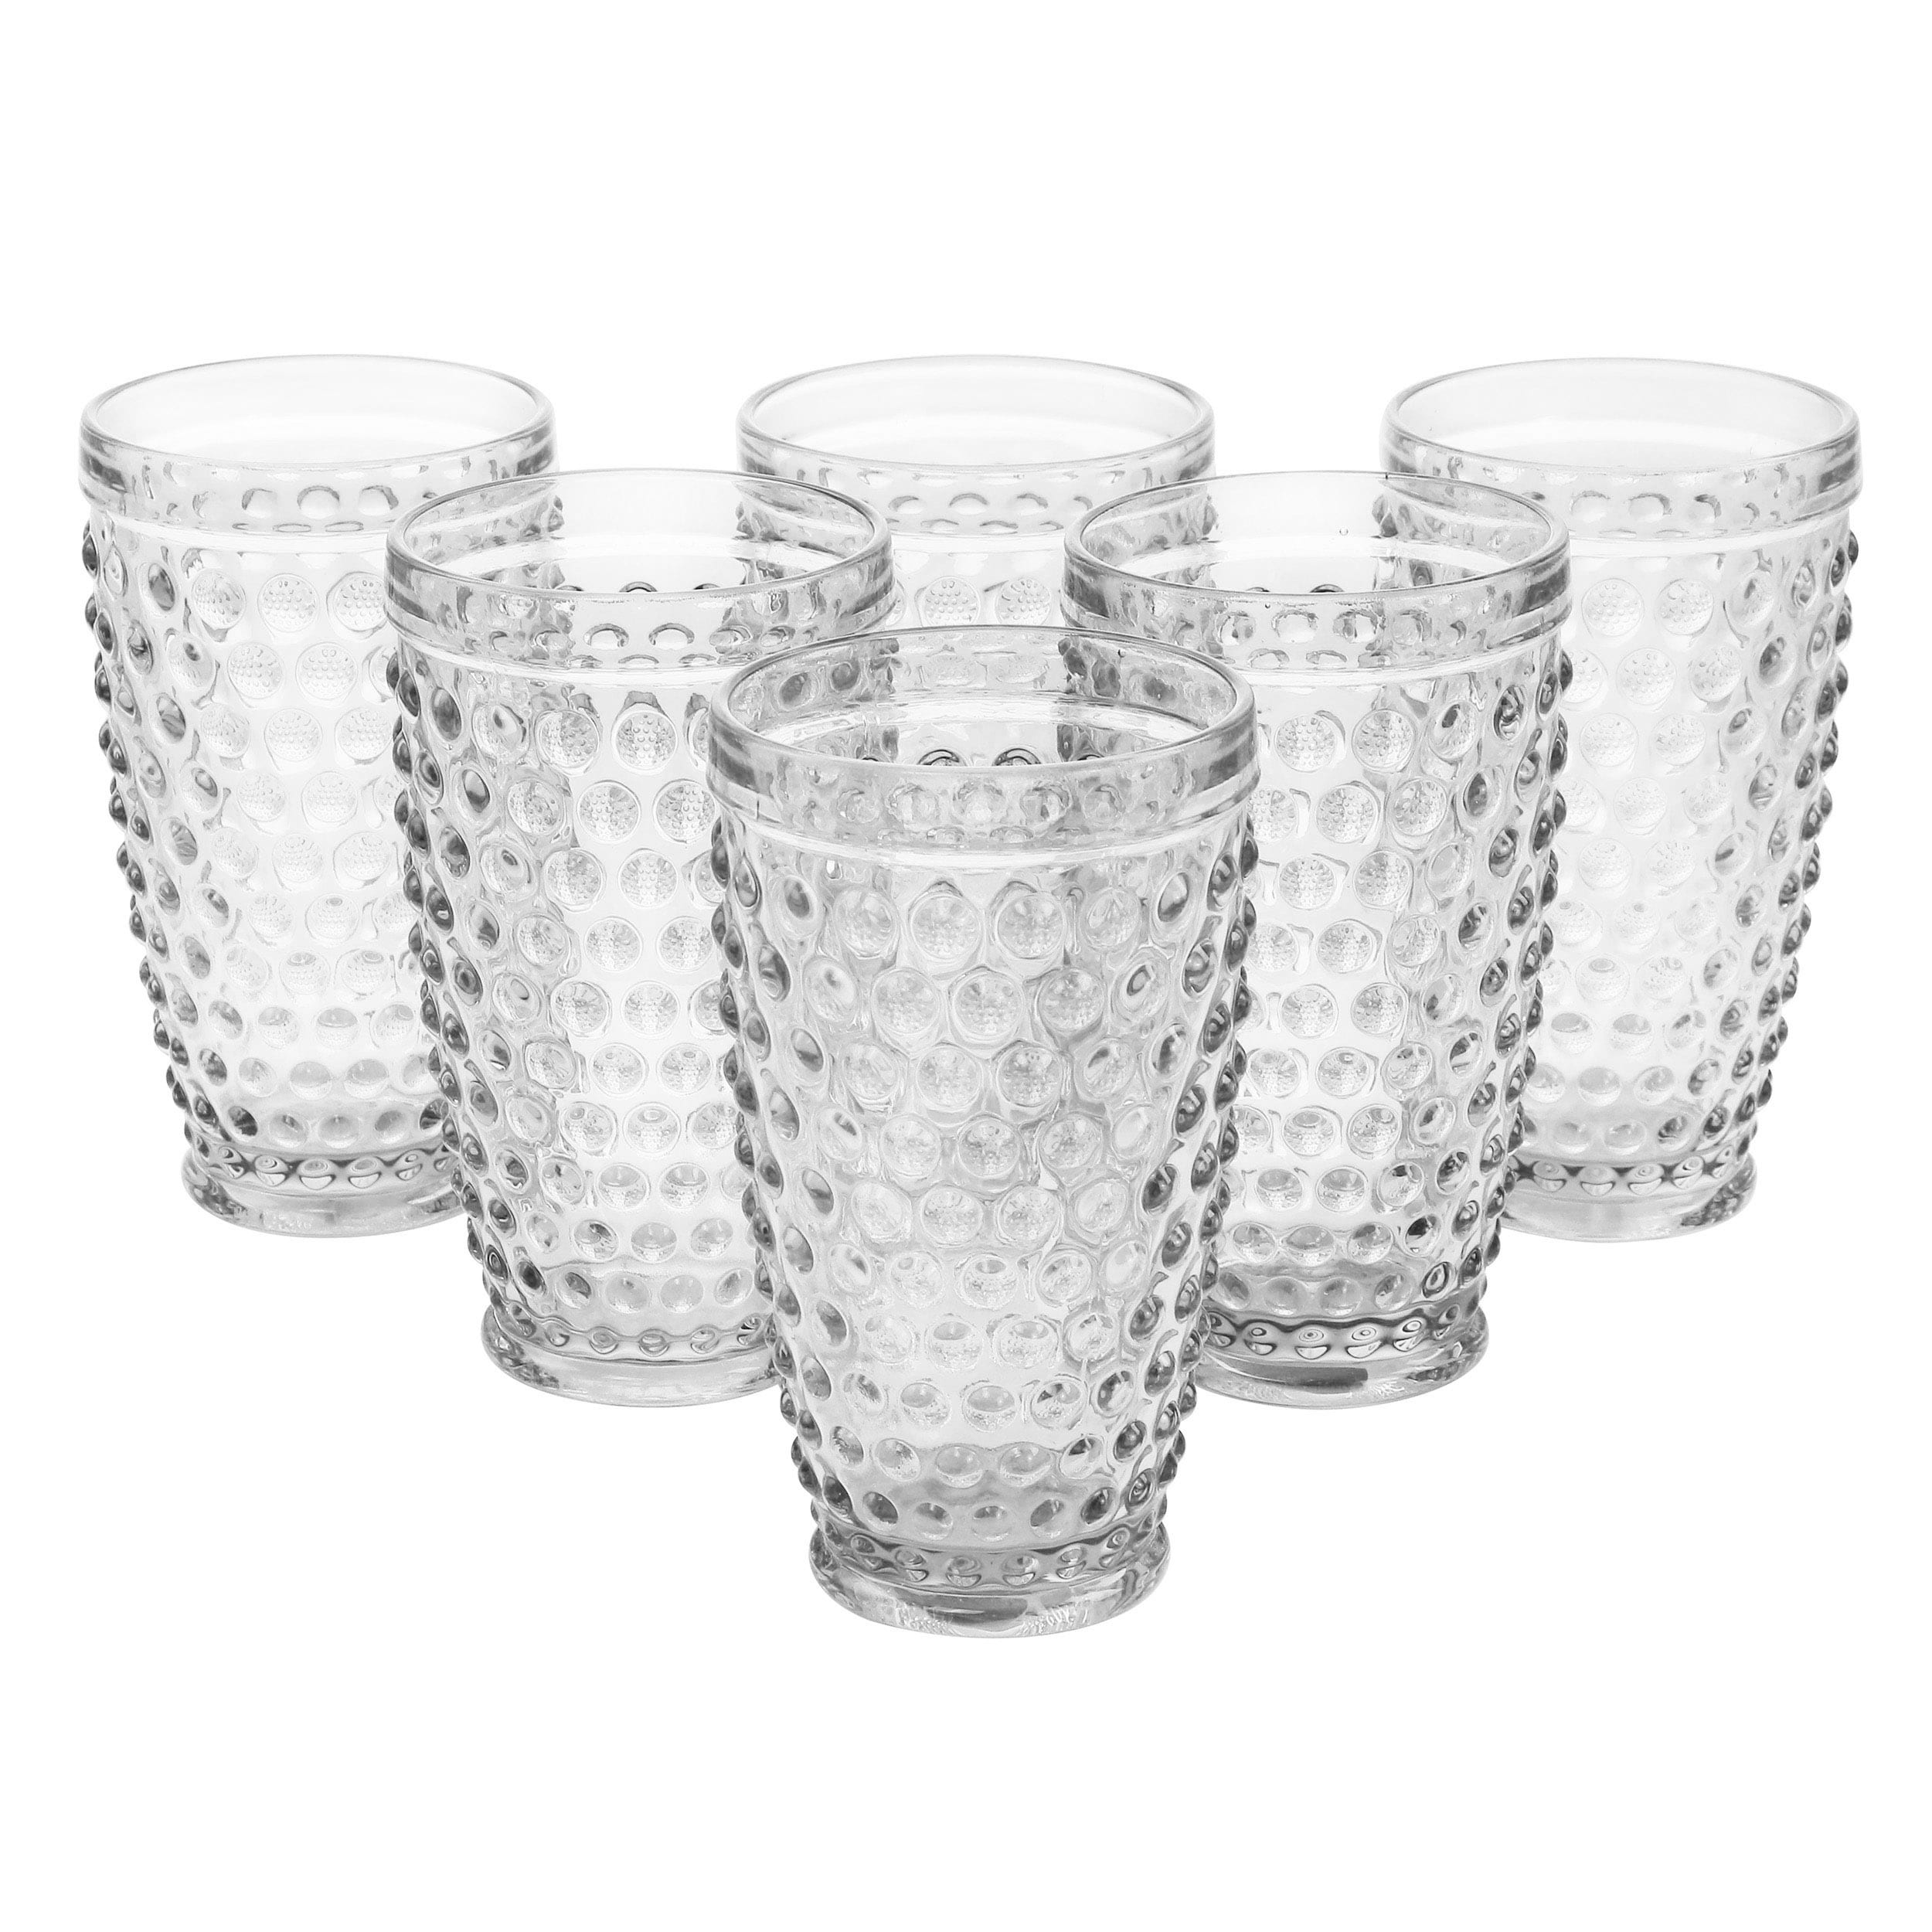 https://ak1.ostkcdn.com/images/products/is/images/direct/08bef901d7e545c8cfa129422ce54d9d71922db9/Martha-Stewart-6-Piece-Hobnail-Handmade-Glass-Tumbler-Set-in-Clear.jpg